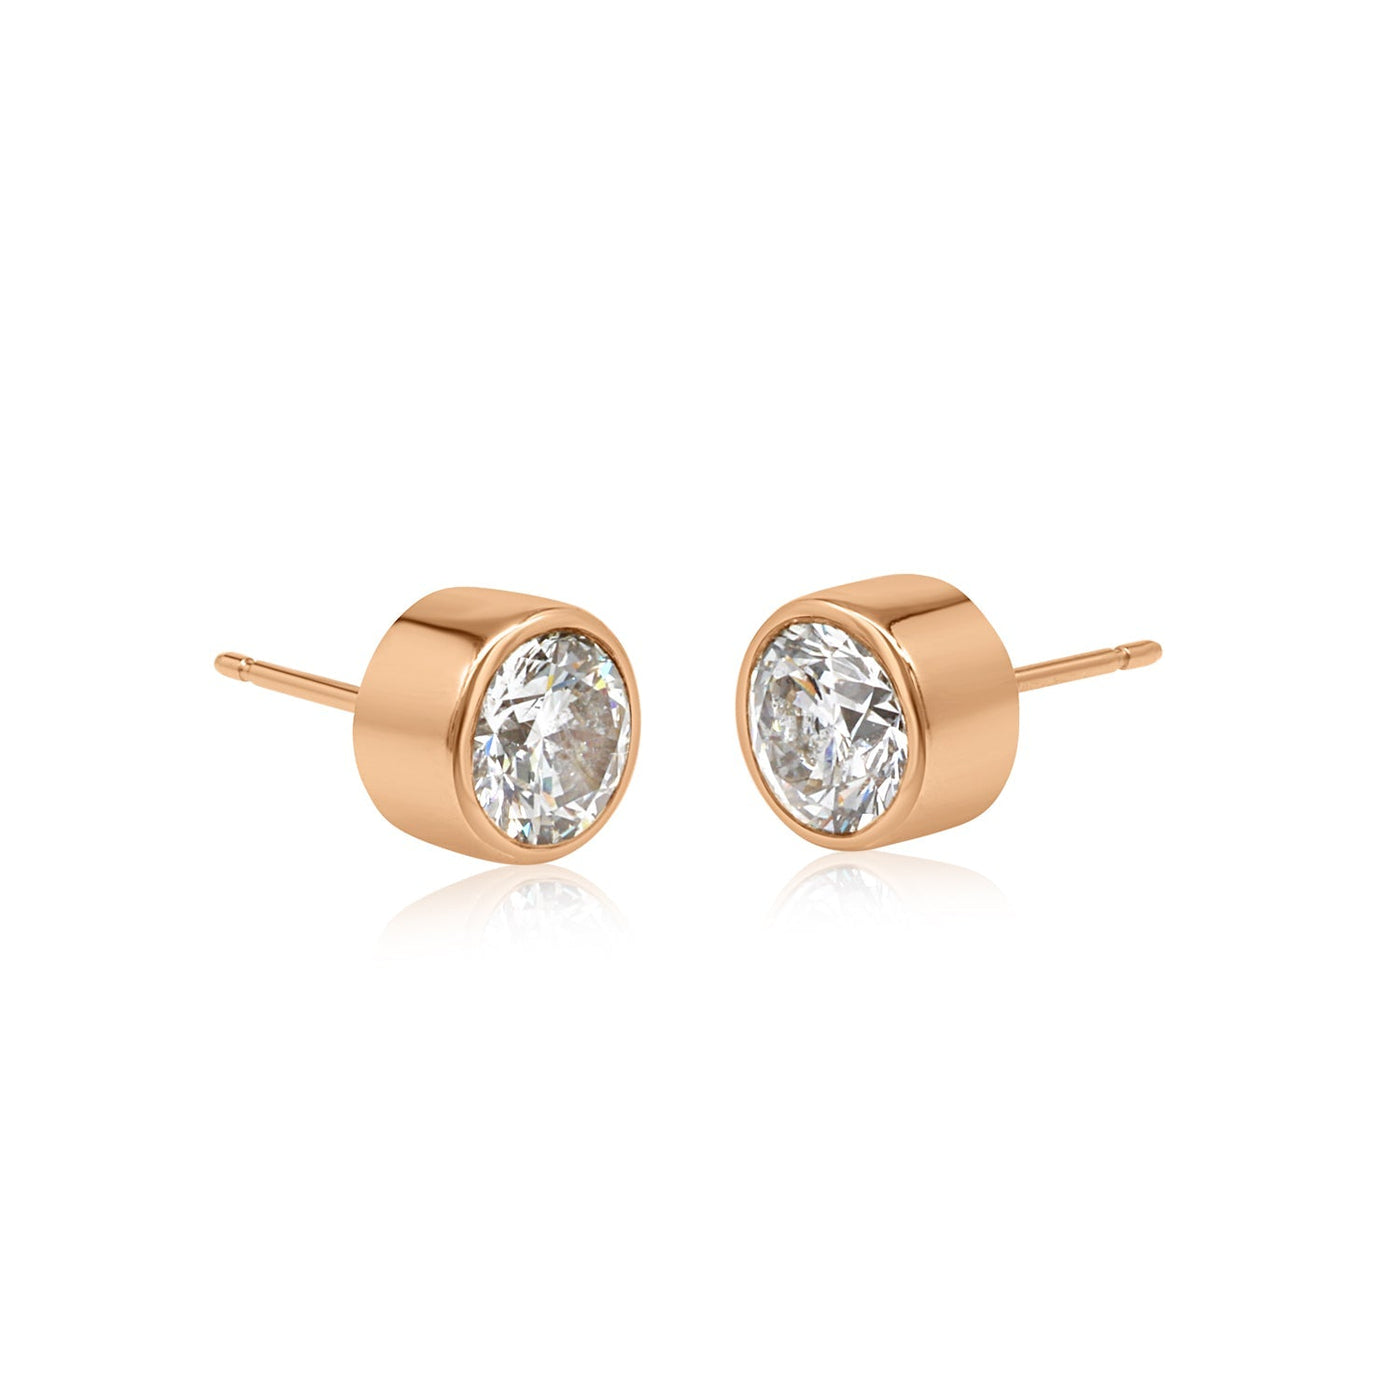 Stud Muffin Earrings Red Gold 1.5 Carat